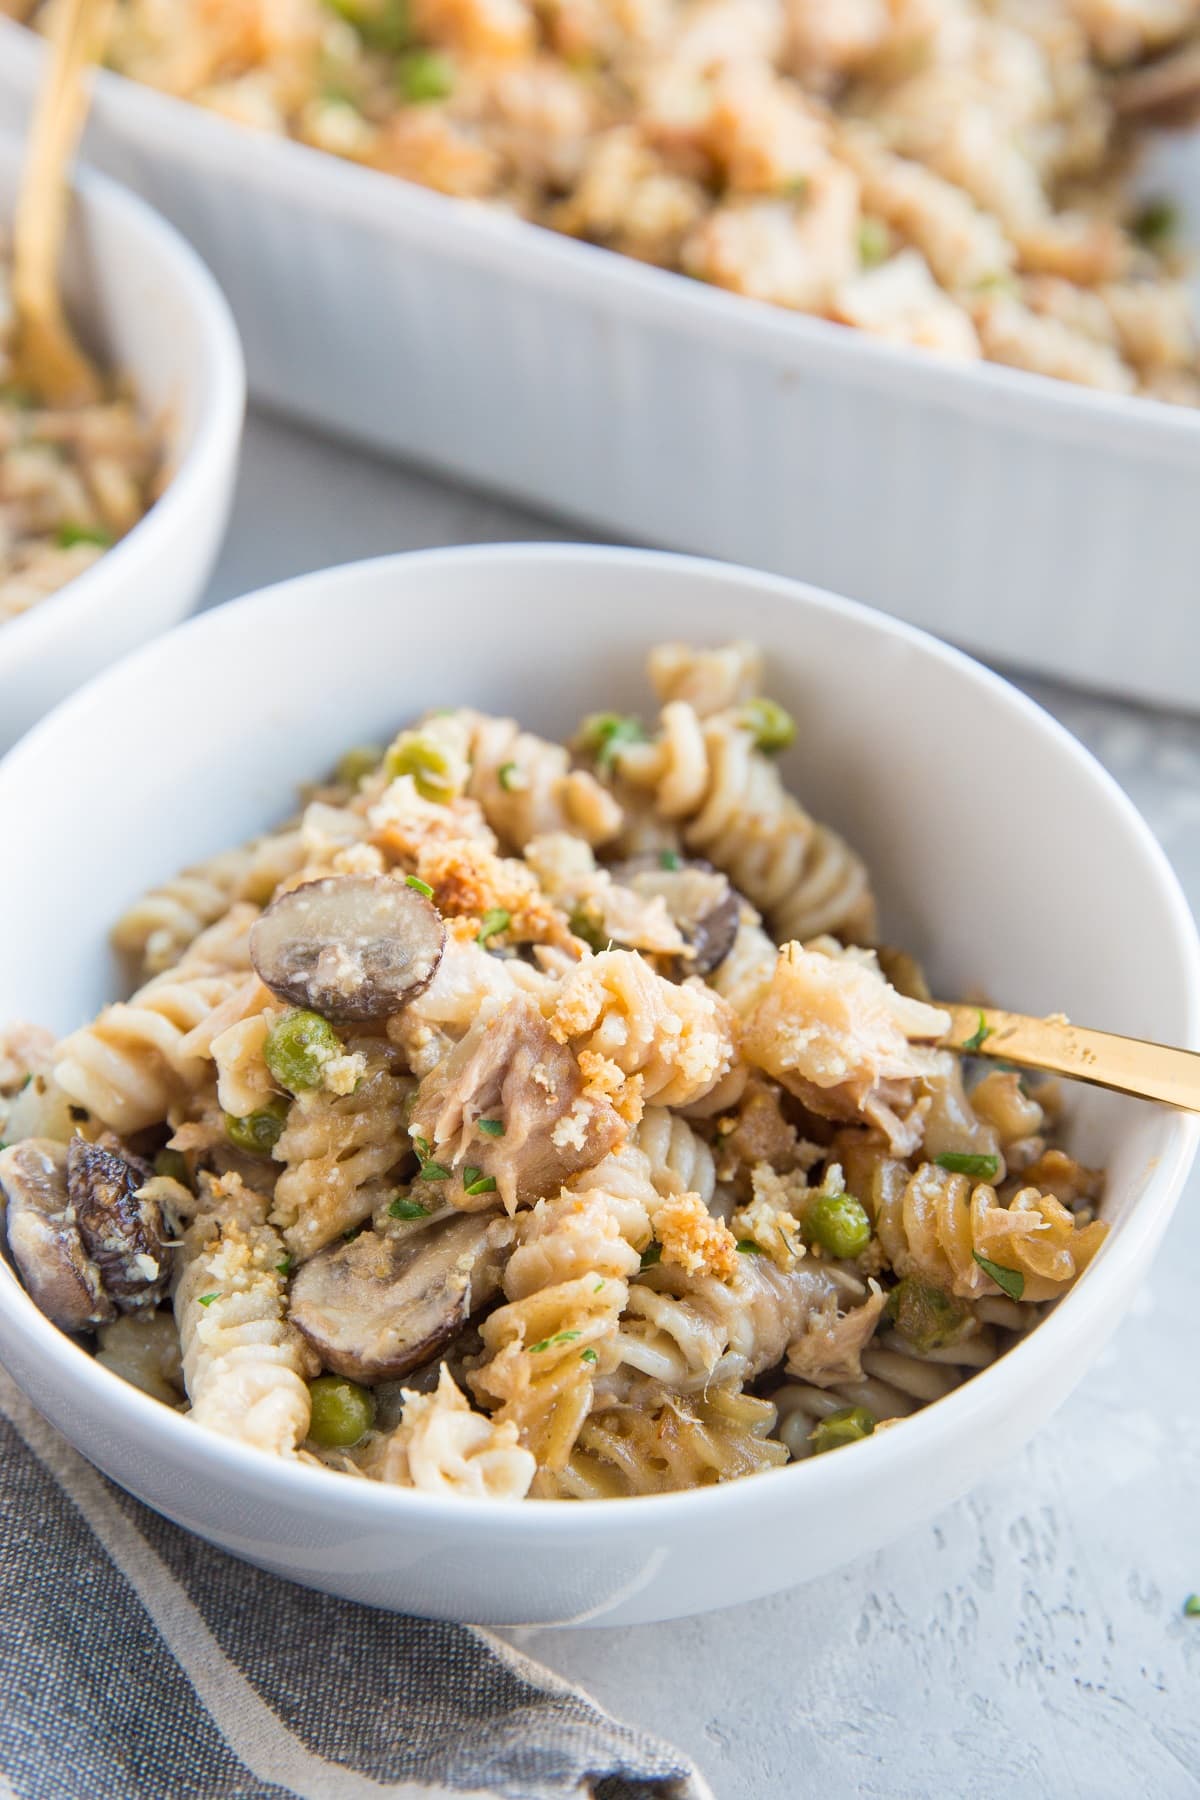 Tuna Noodle Casserole made with gluten-free pasta noodles and no cream or milk. An easy and delicious casserole recipe